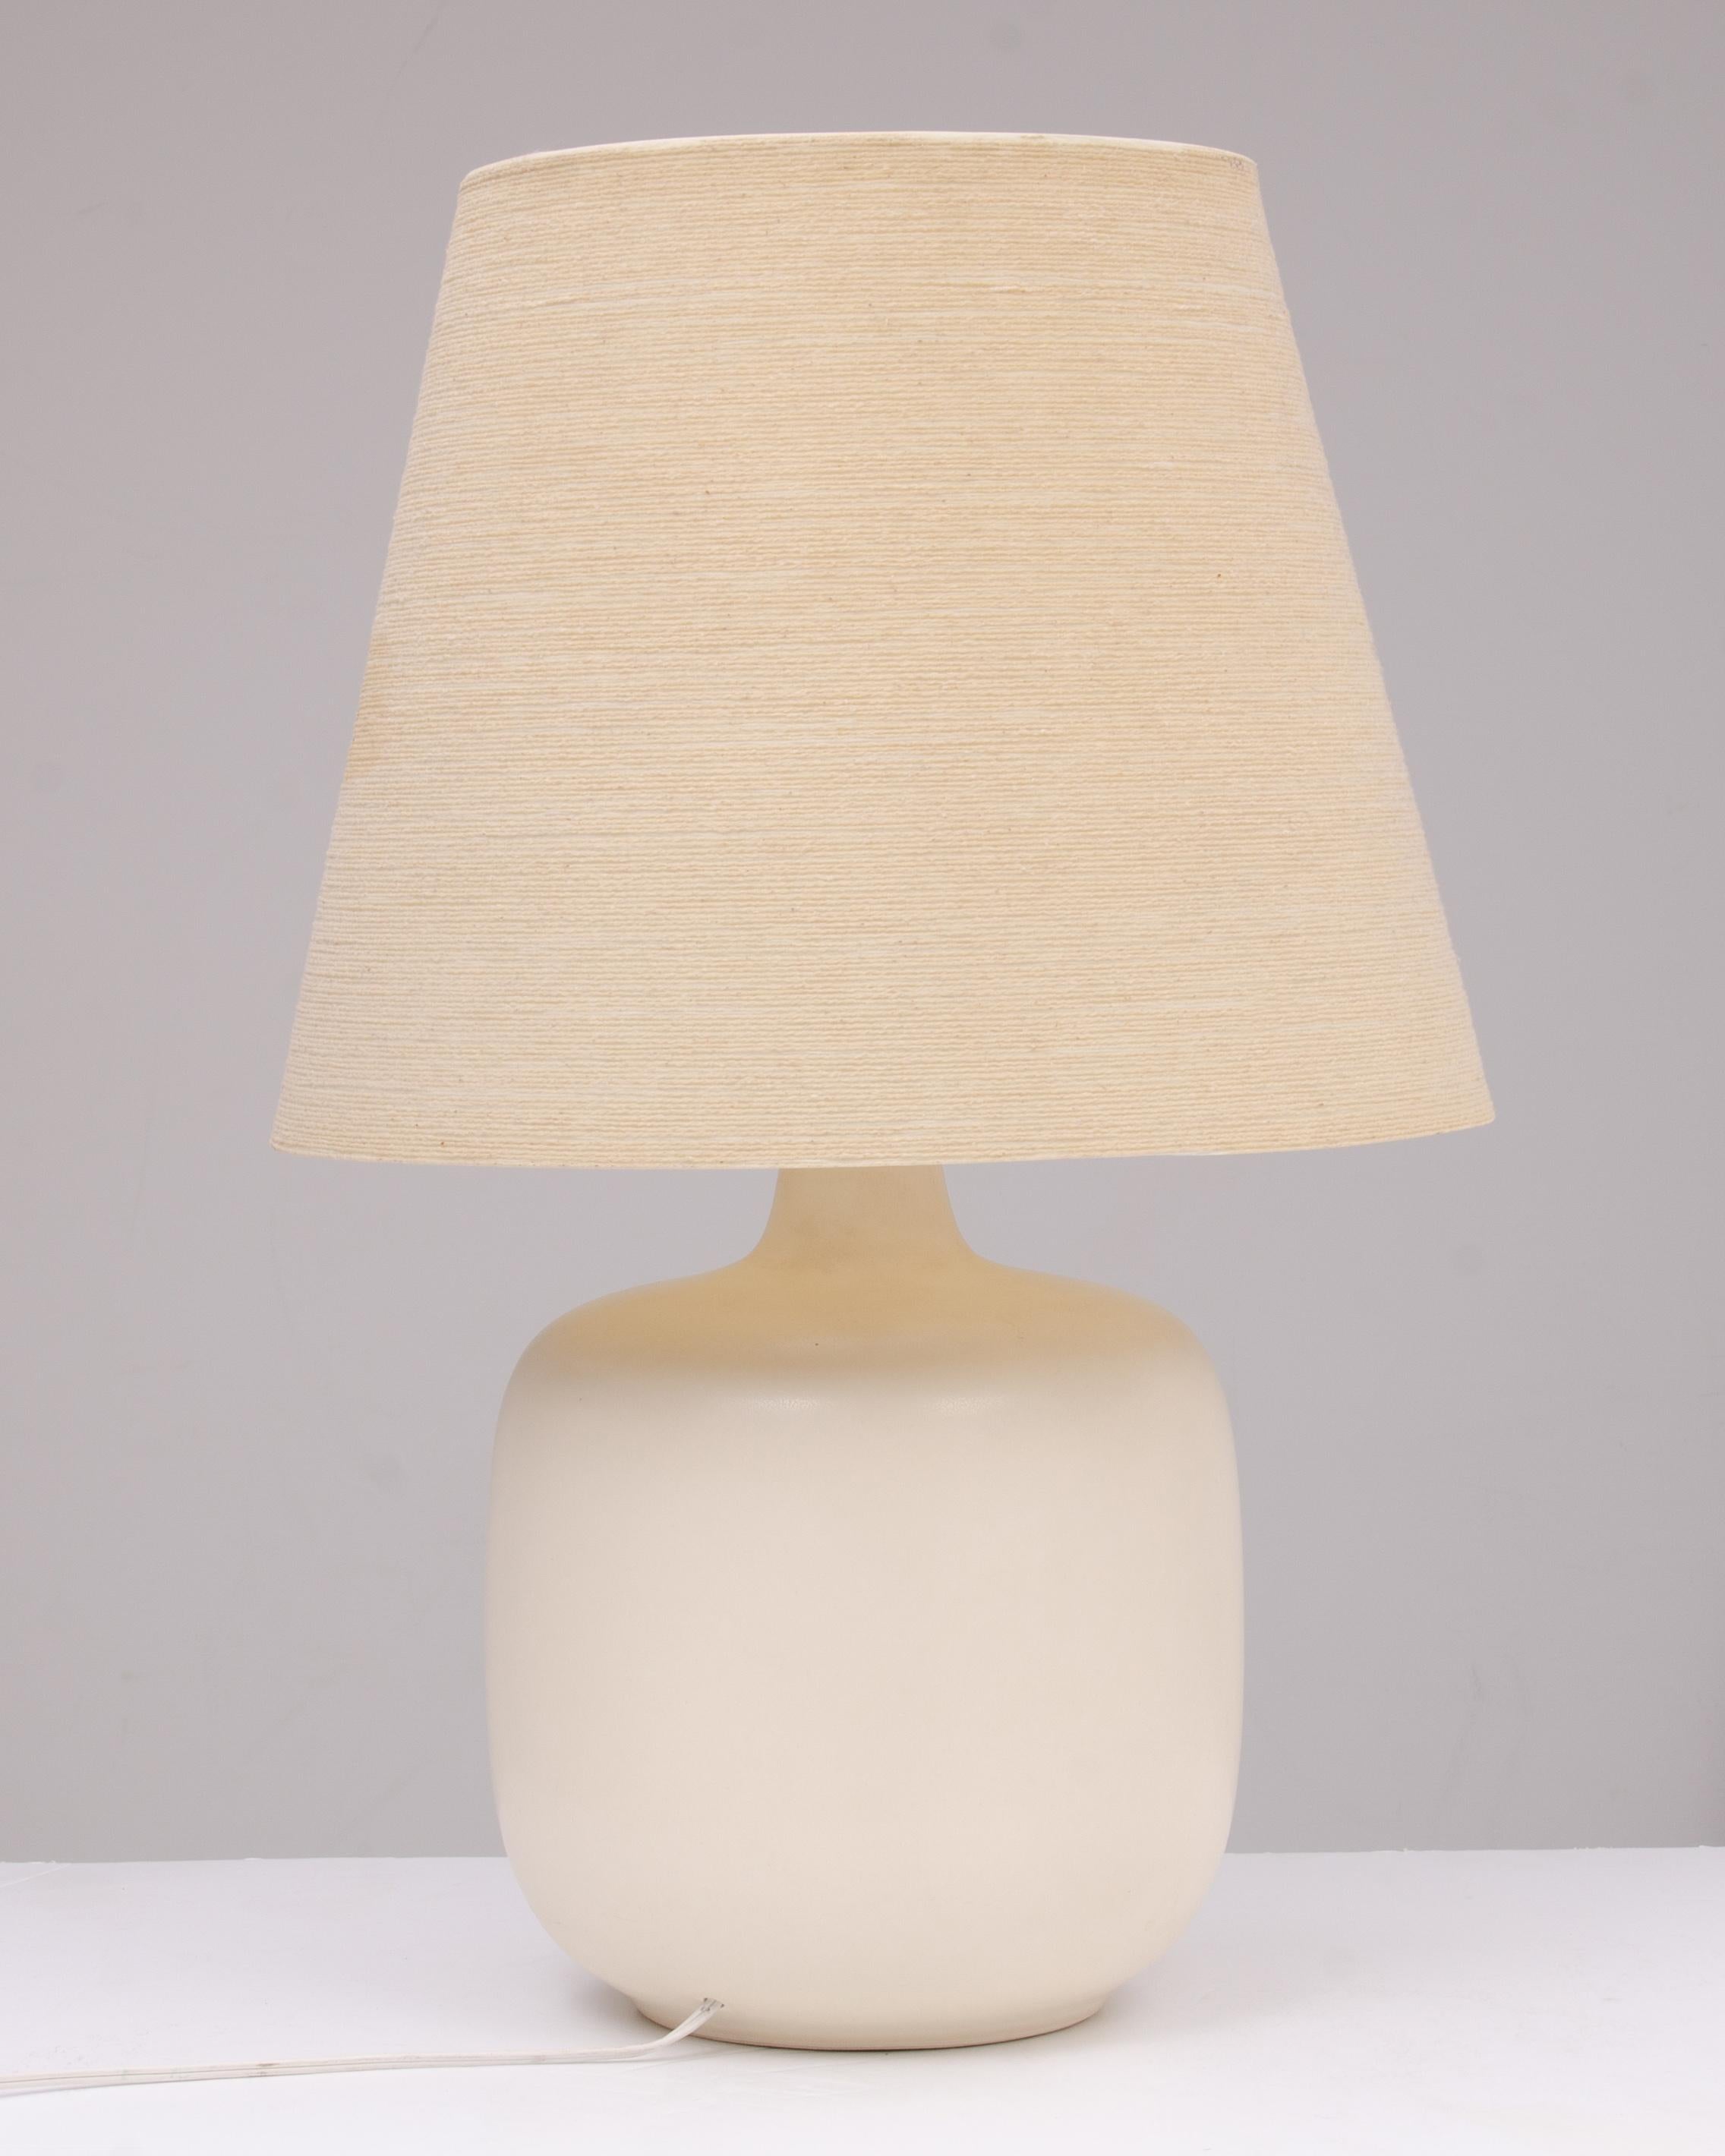 An impressive and large Lotte & Gunnar Bostlund table lamp in bone off white with the hard to find original shade in very good condition. At some time in the past the socket was been replaced, so the lamp is unmarked.The lamp has a 10” diameter, the